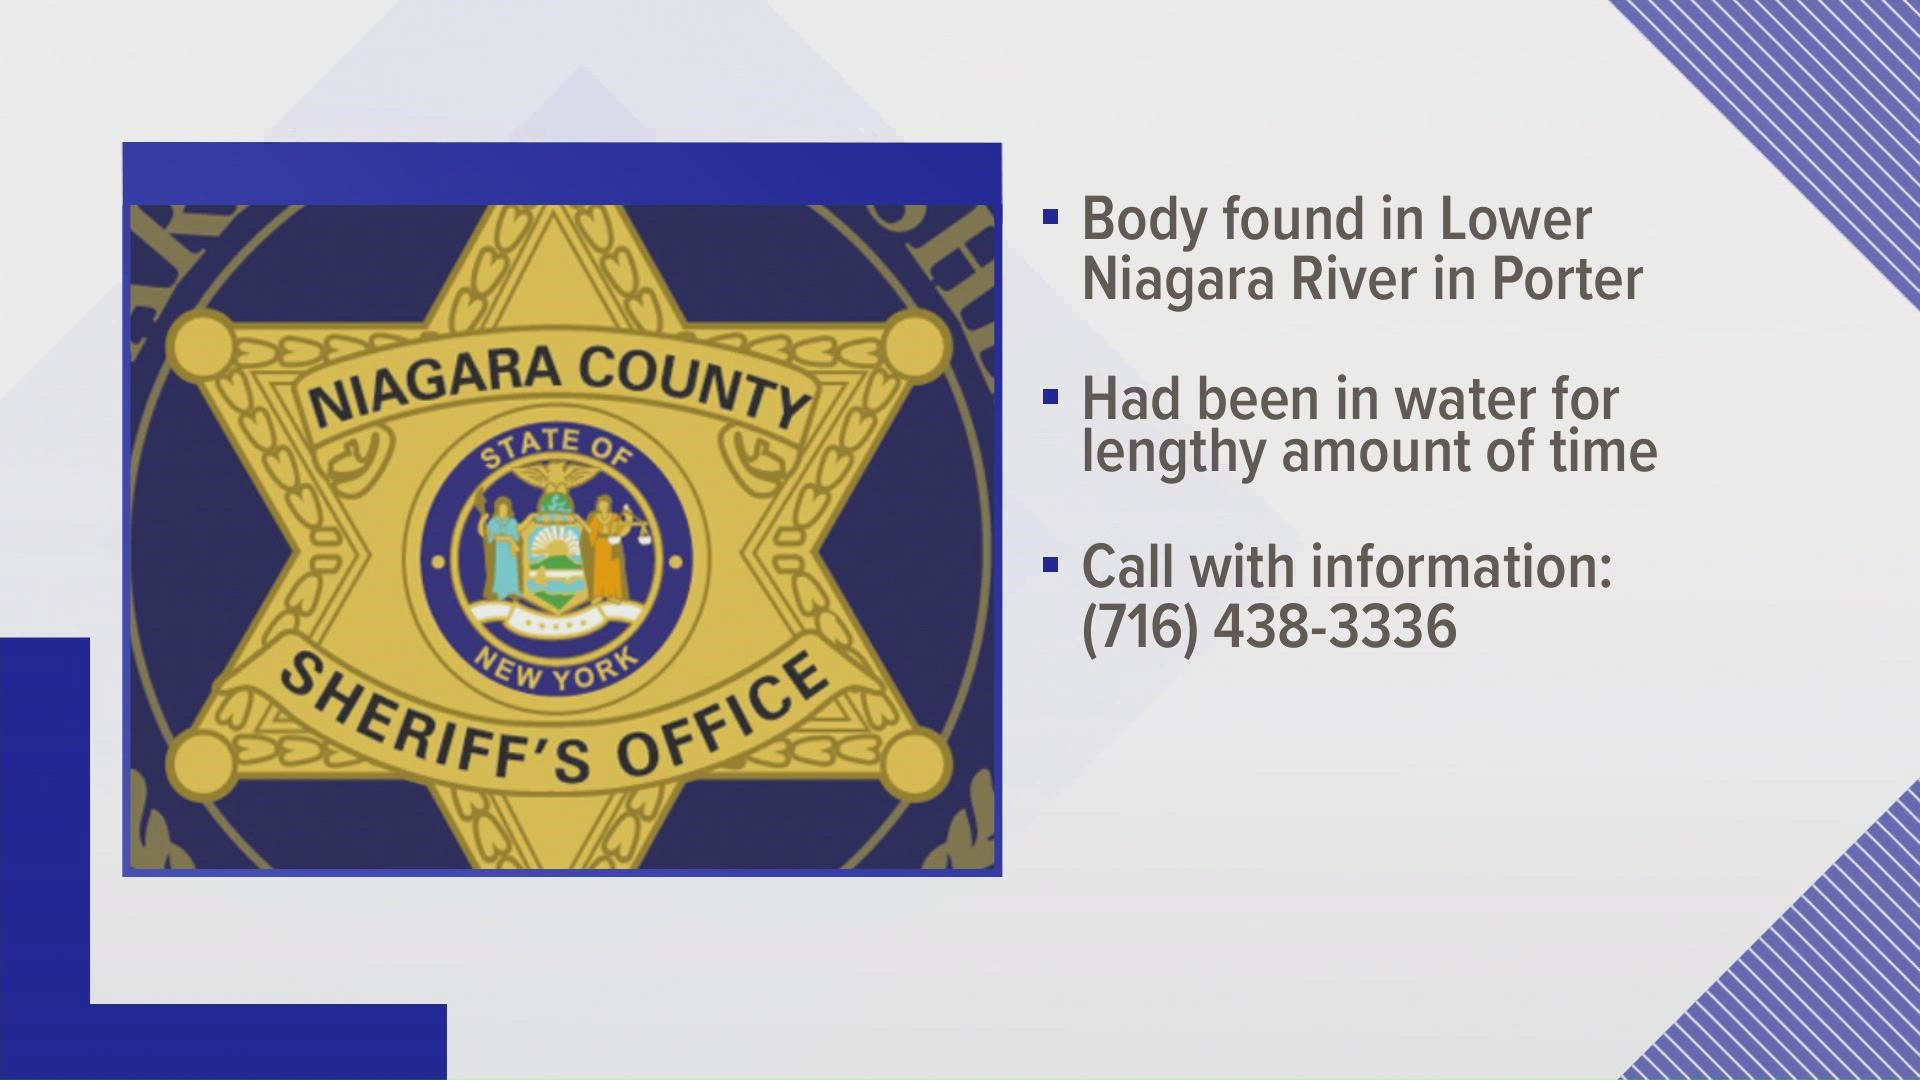 Body recovered in Lower Niagara River on Wednesday